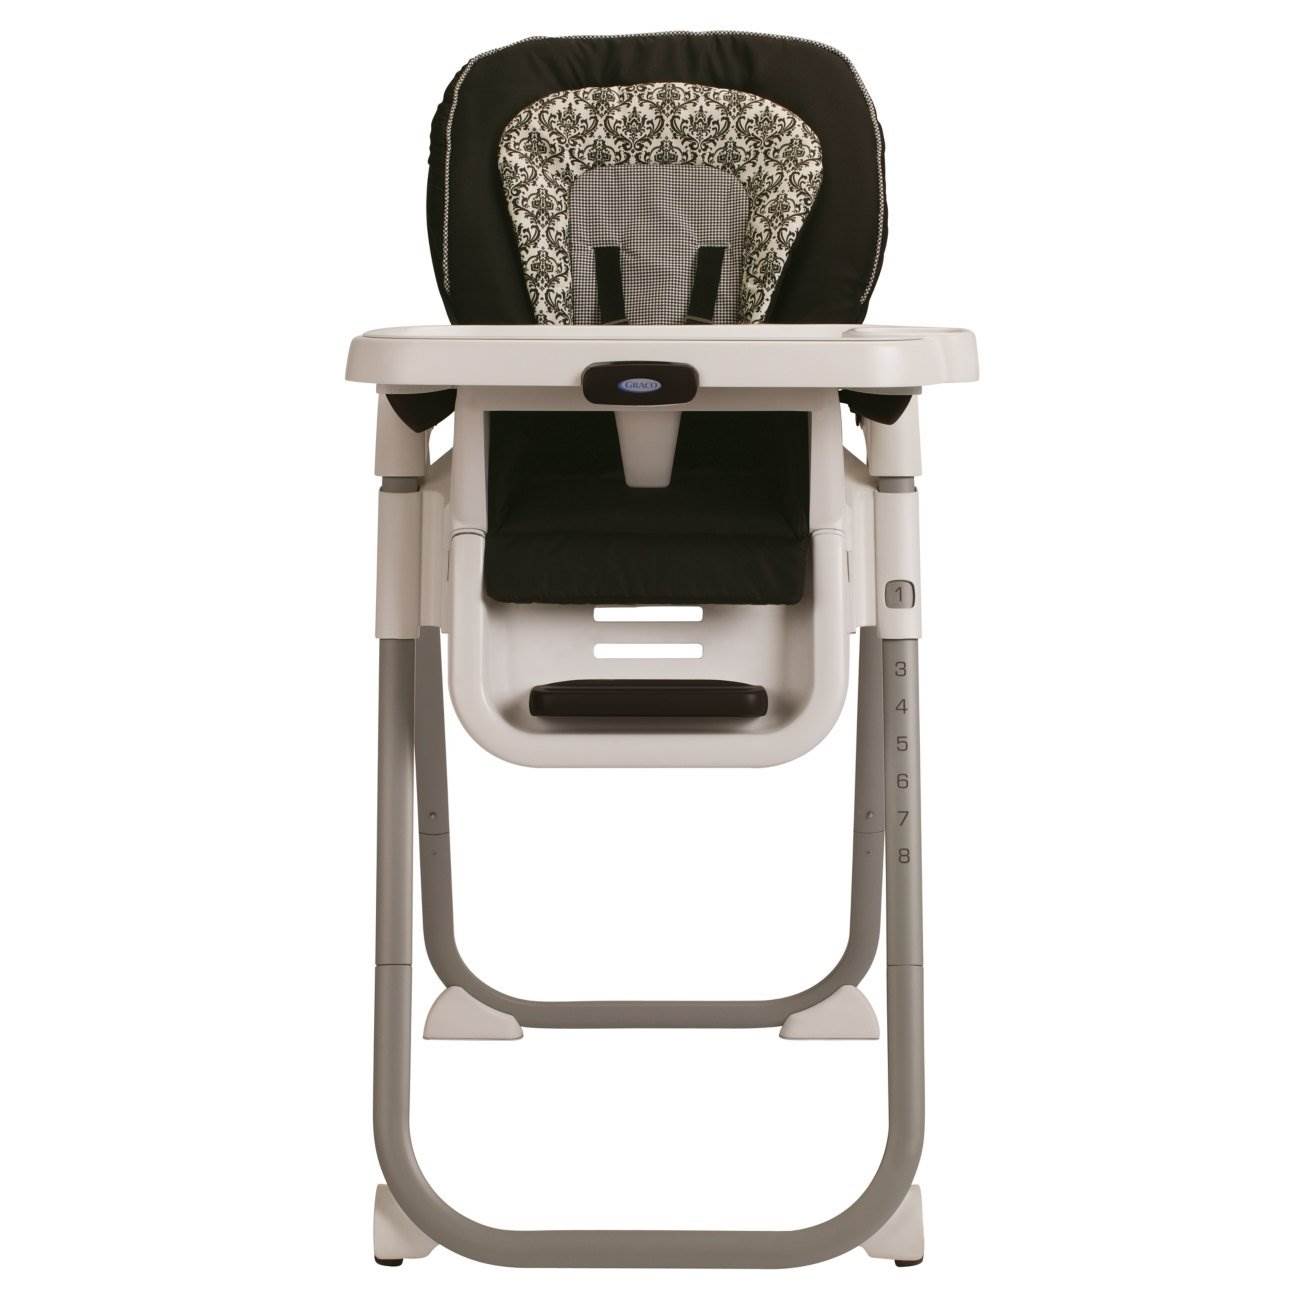 Graco Table Fit Highchair Seating & Feeding System - Rittenhouse | 1852649 - image 2 of 3